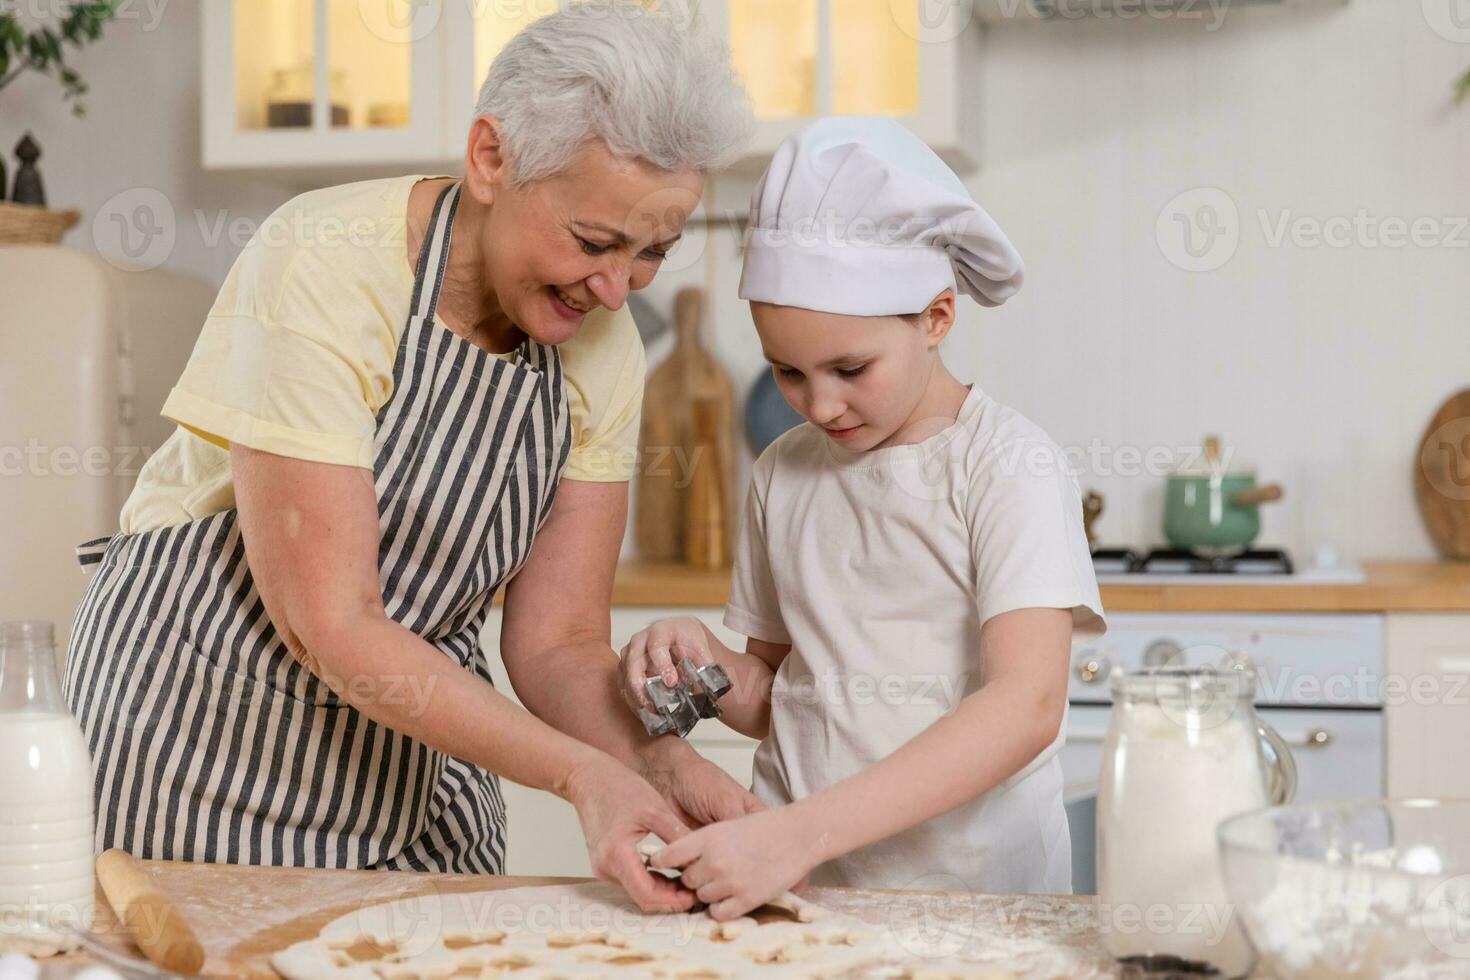 Happy family in kitchen. Grandmother granddaughter child cutting cookies of dough on kitchen table together. Grandma teaching kid girl cook bake cookies. Household teamwork helping family generations. photo